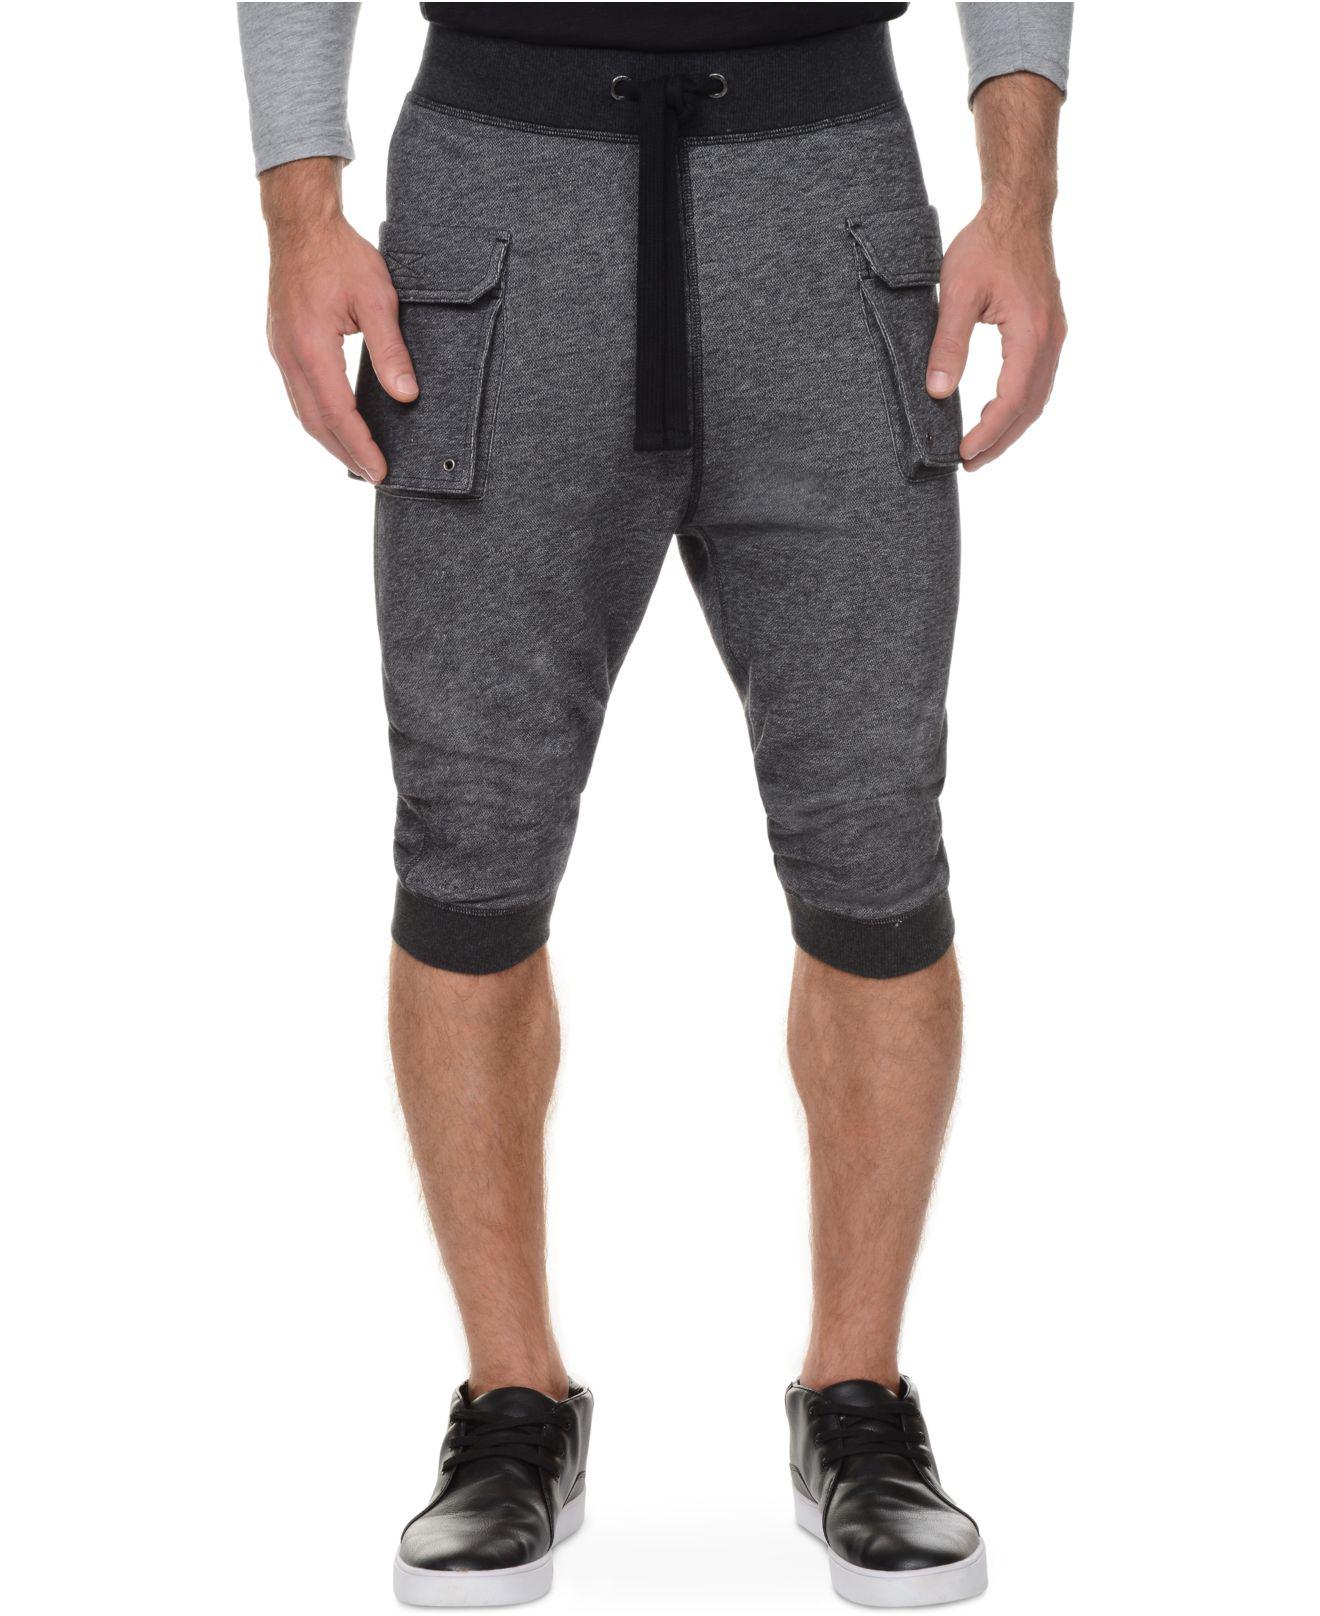 Lyst - 2Xist Athleisure Men's Cropped Cargo Pants in Black for Men